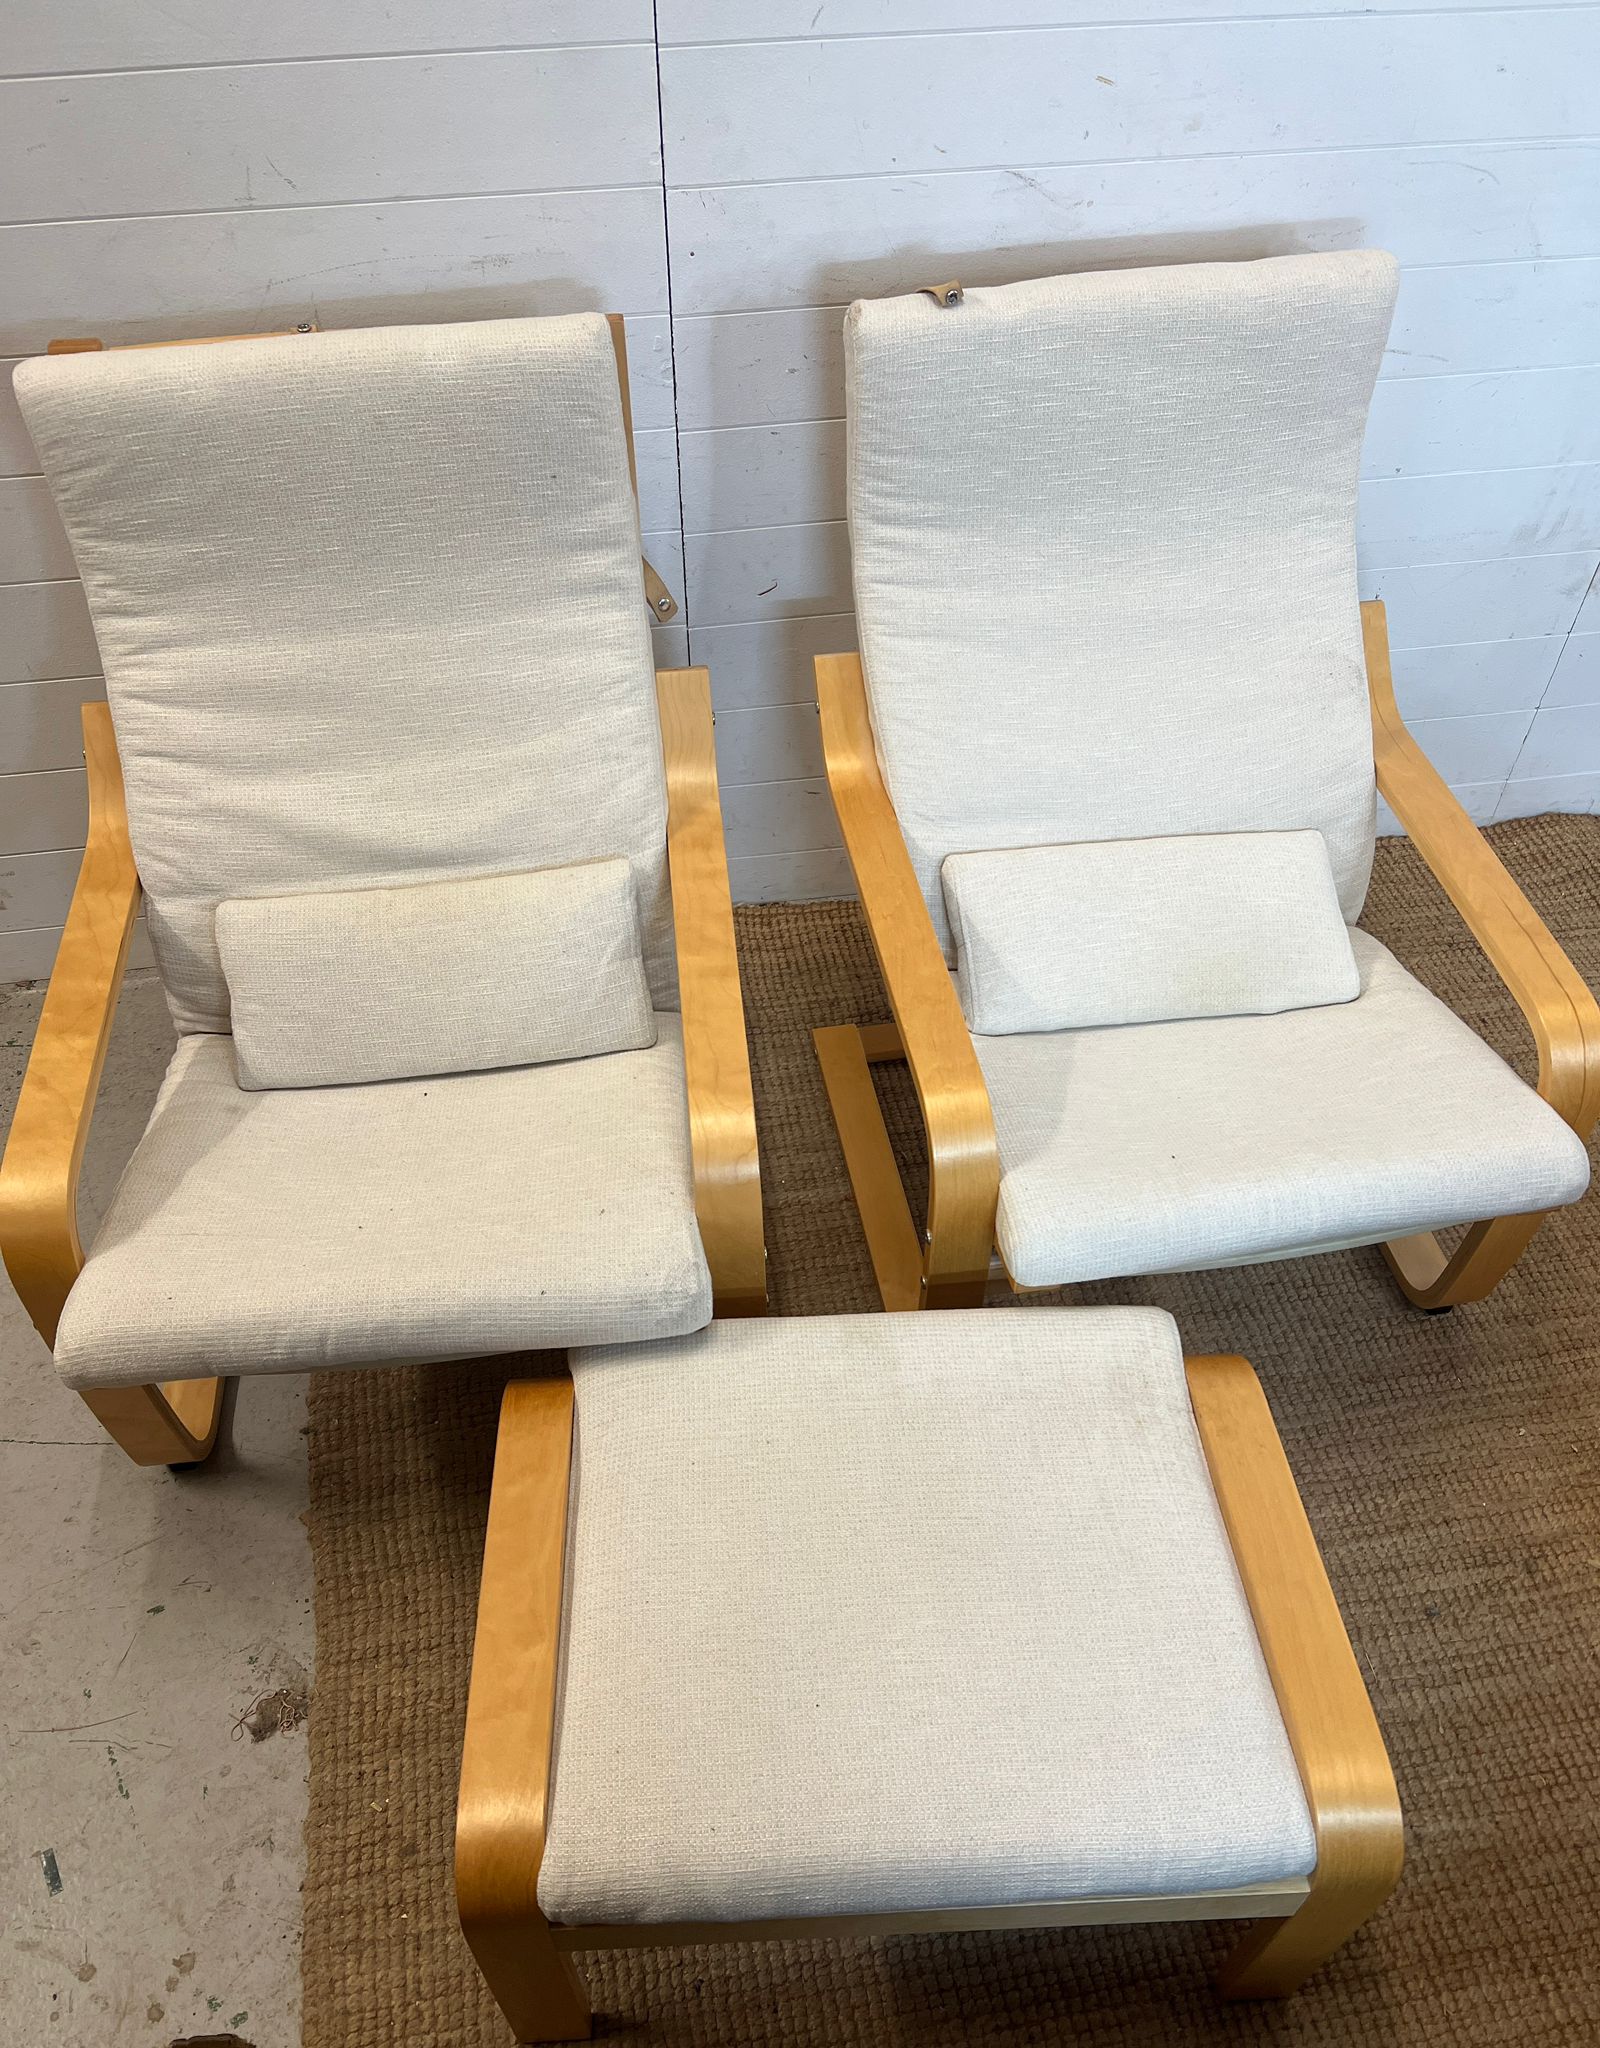 A pair of Ikea Poang chairs and matching footstool